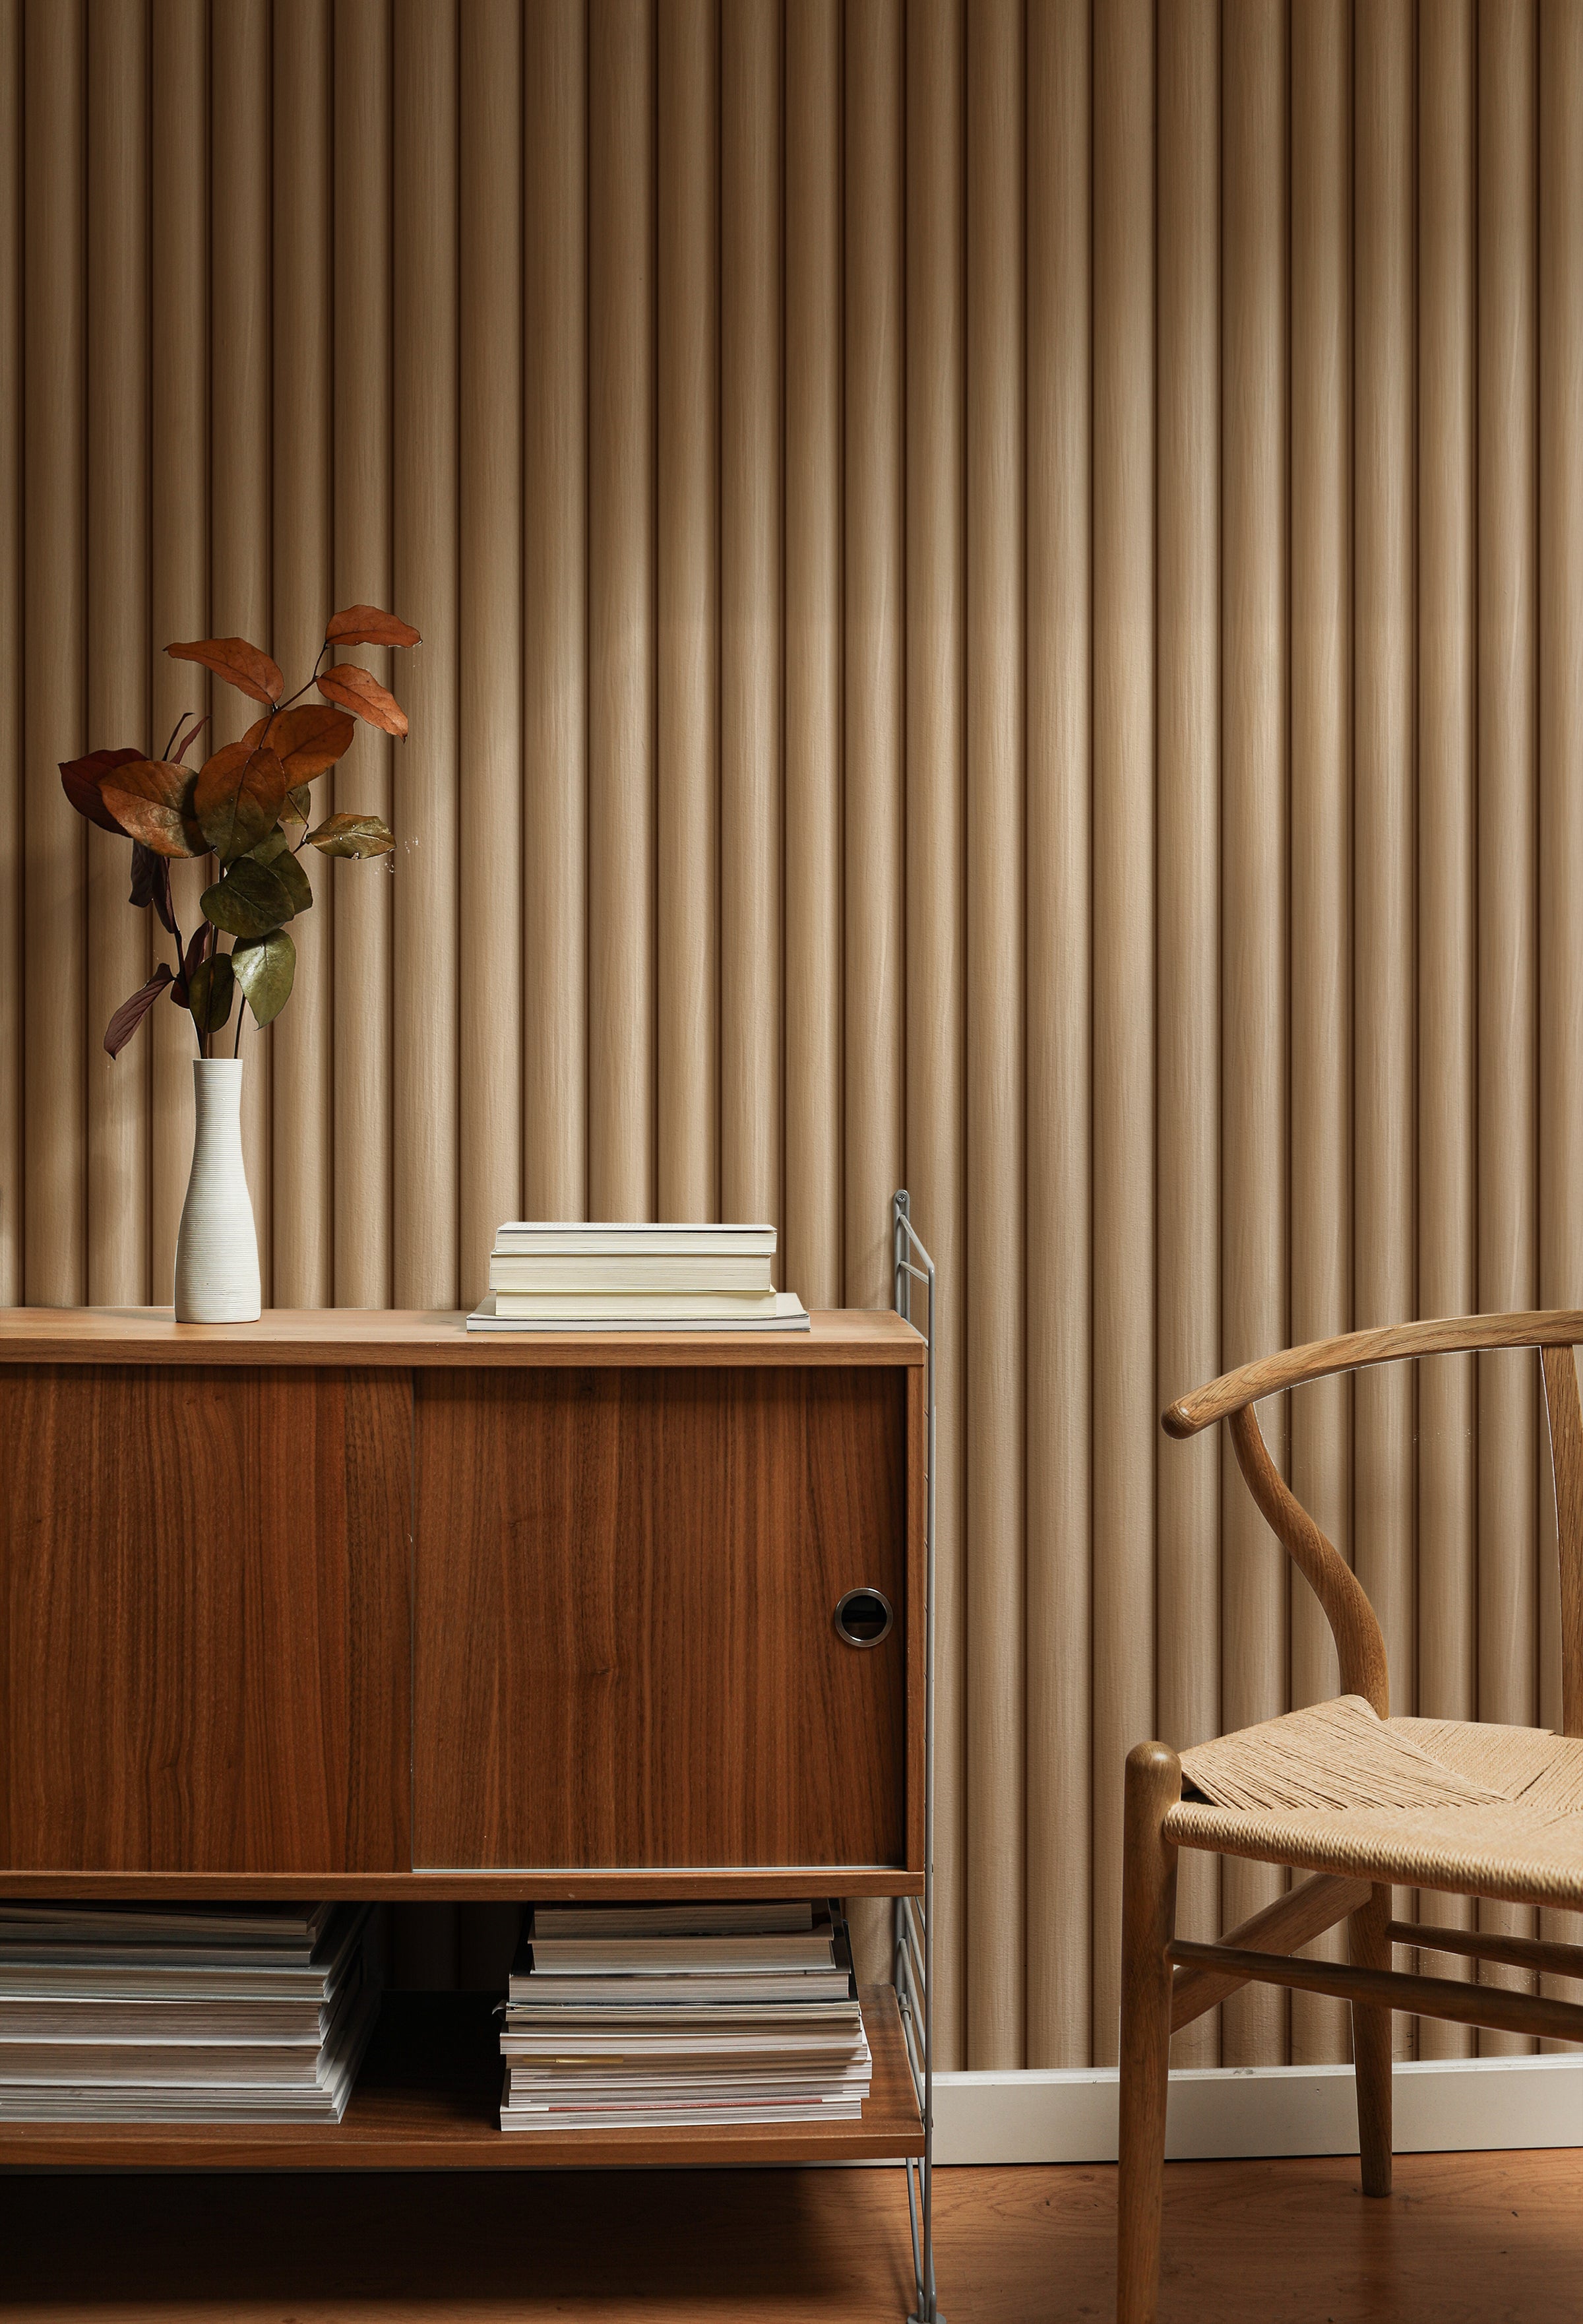 A stylish room with Wooden Pillar Wallpaper showcasing vertical grooves in a warm wood tone. The wallpaper enhances the room's aesthetic, highlighted by a mid-century modern wooden cabinet with books and a vase with autumn leaves.